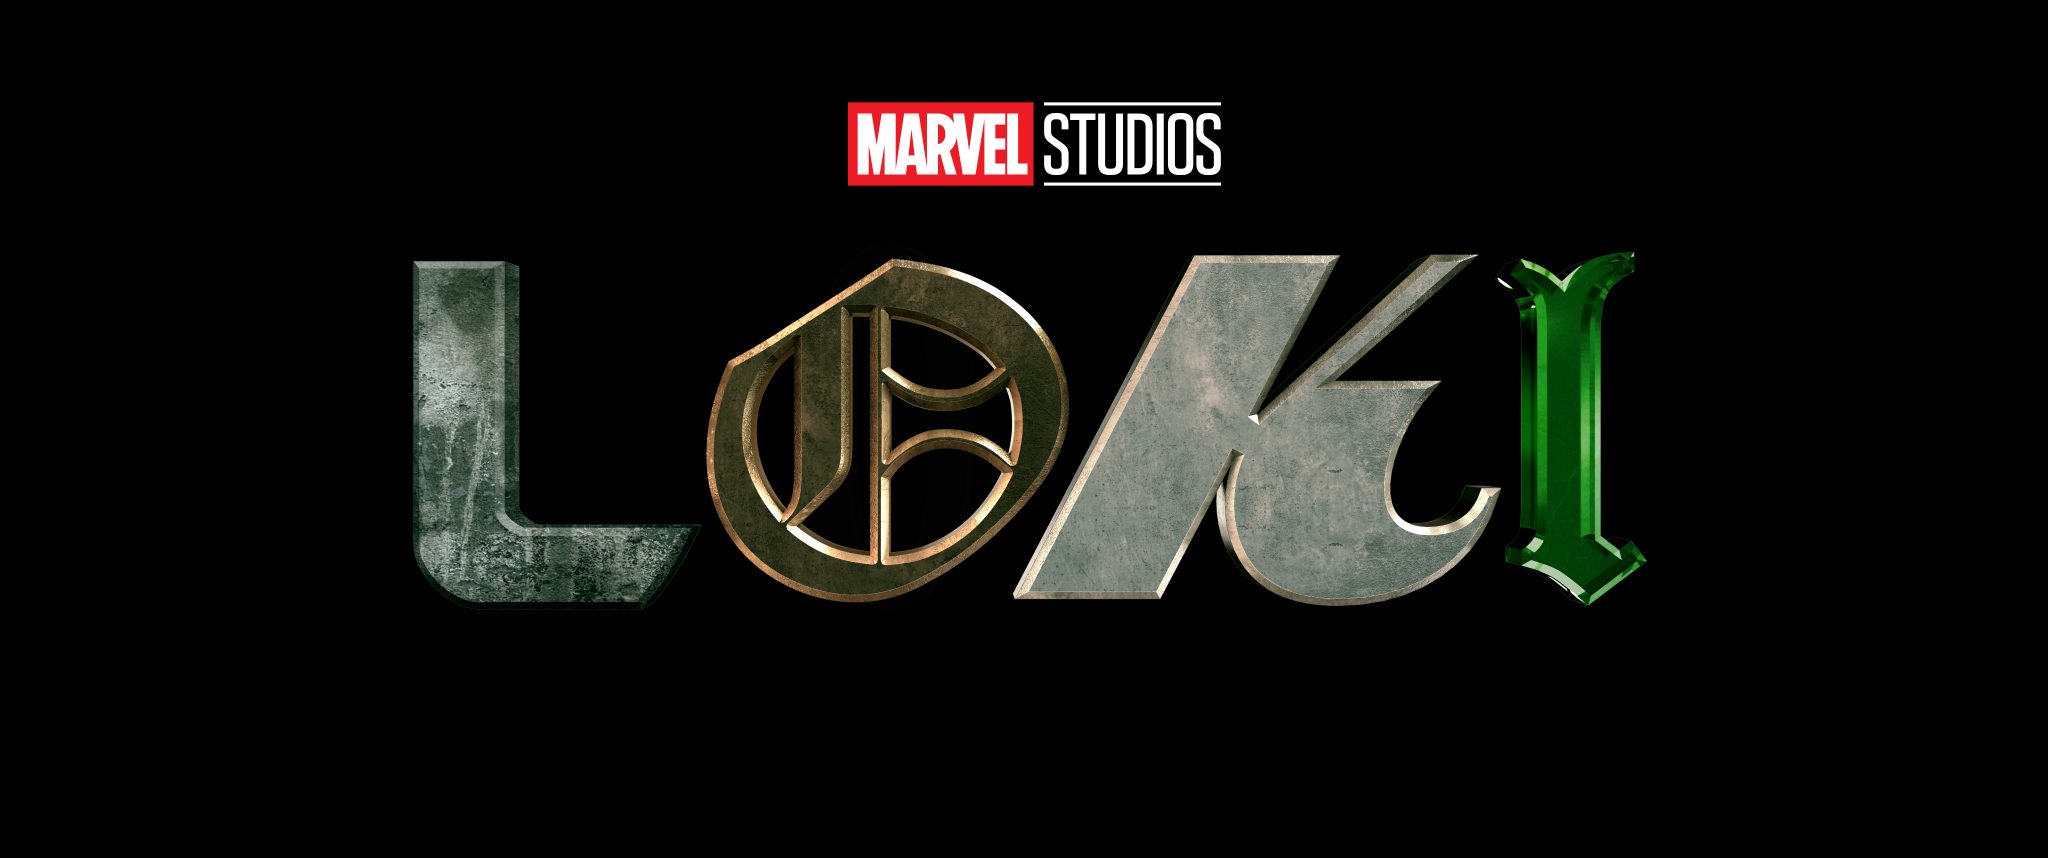 VIDEO: New Trailer for ‘Loki,’ Coming to Disney+ Soon